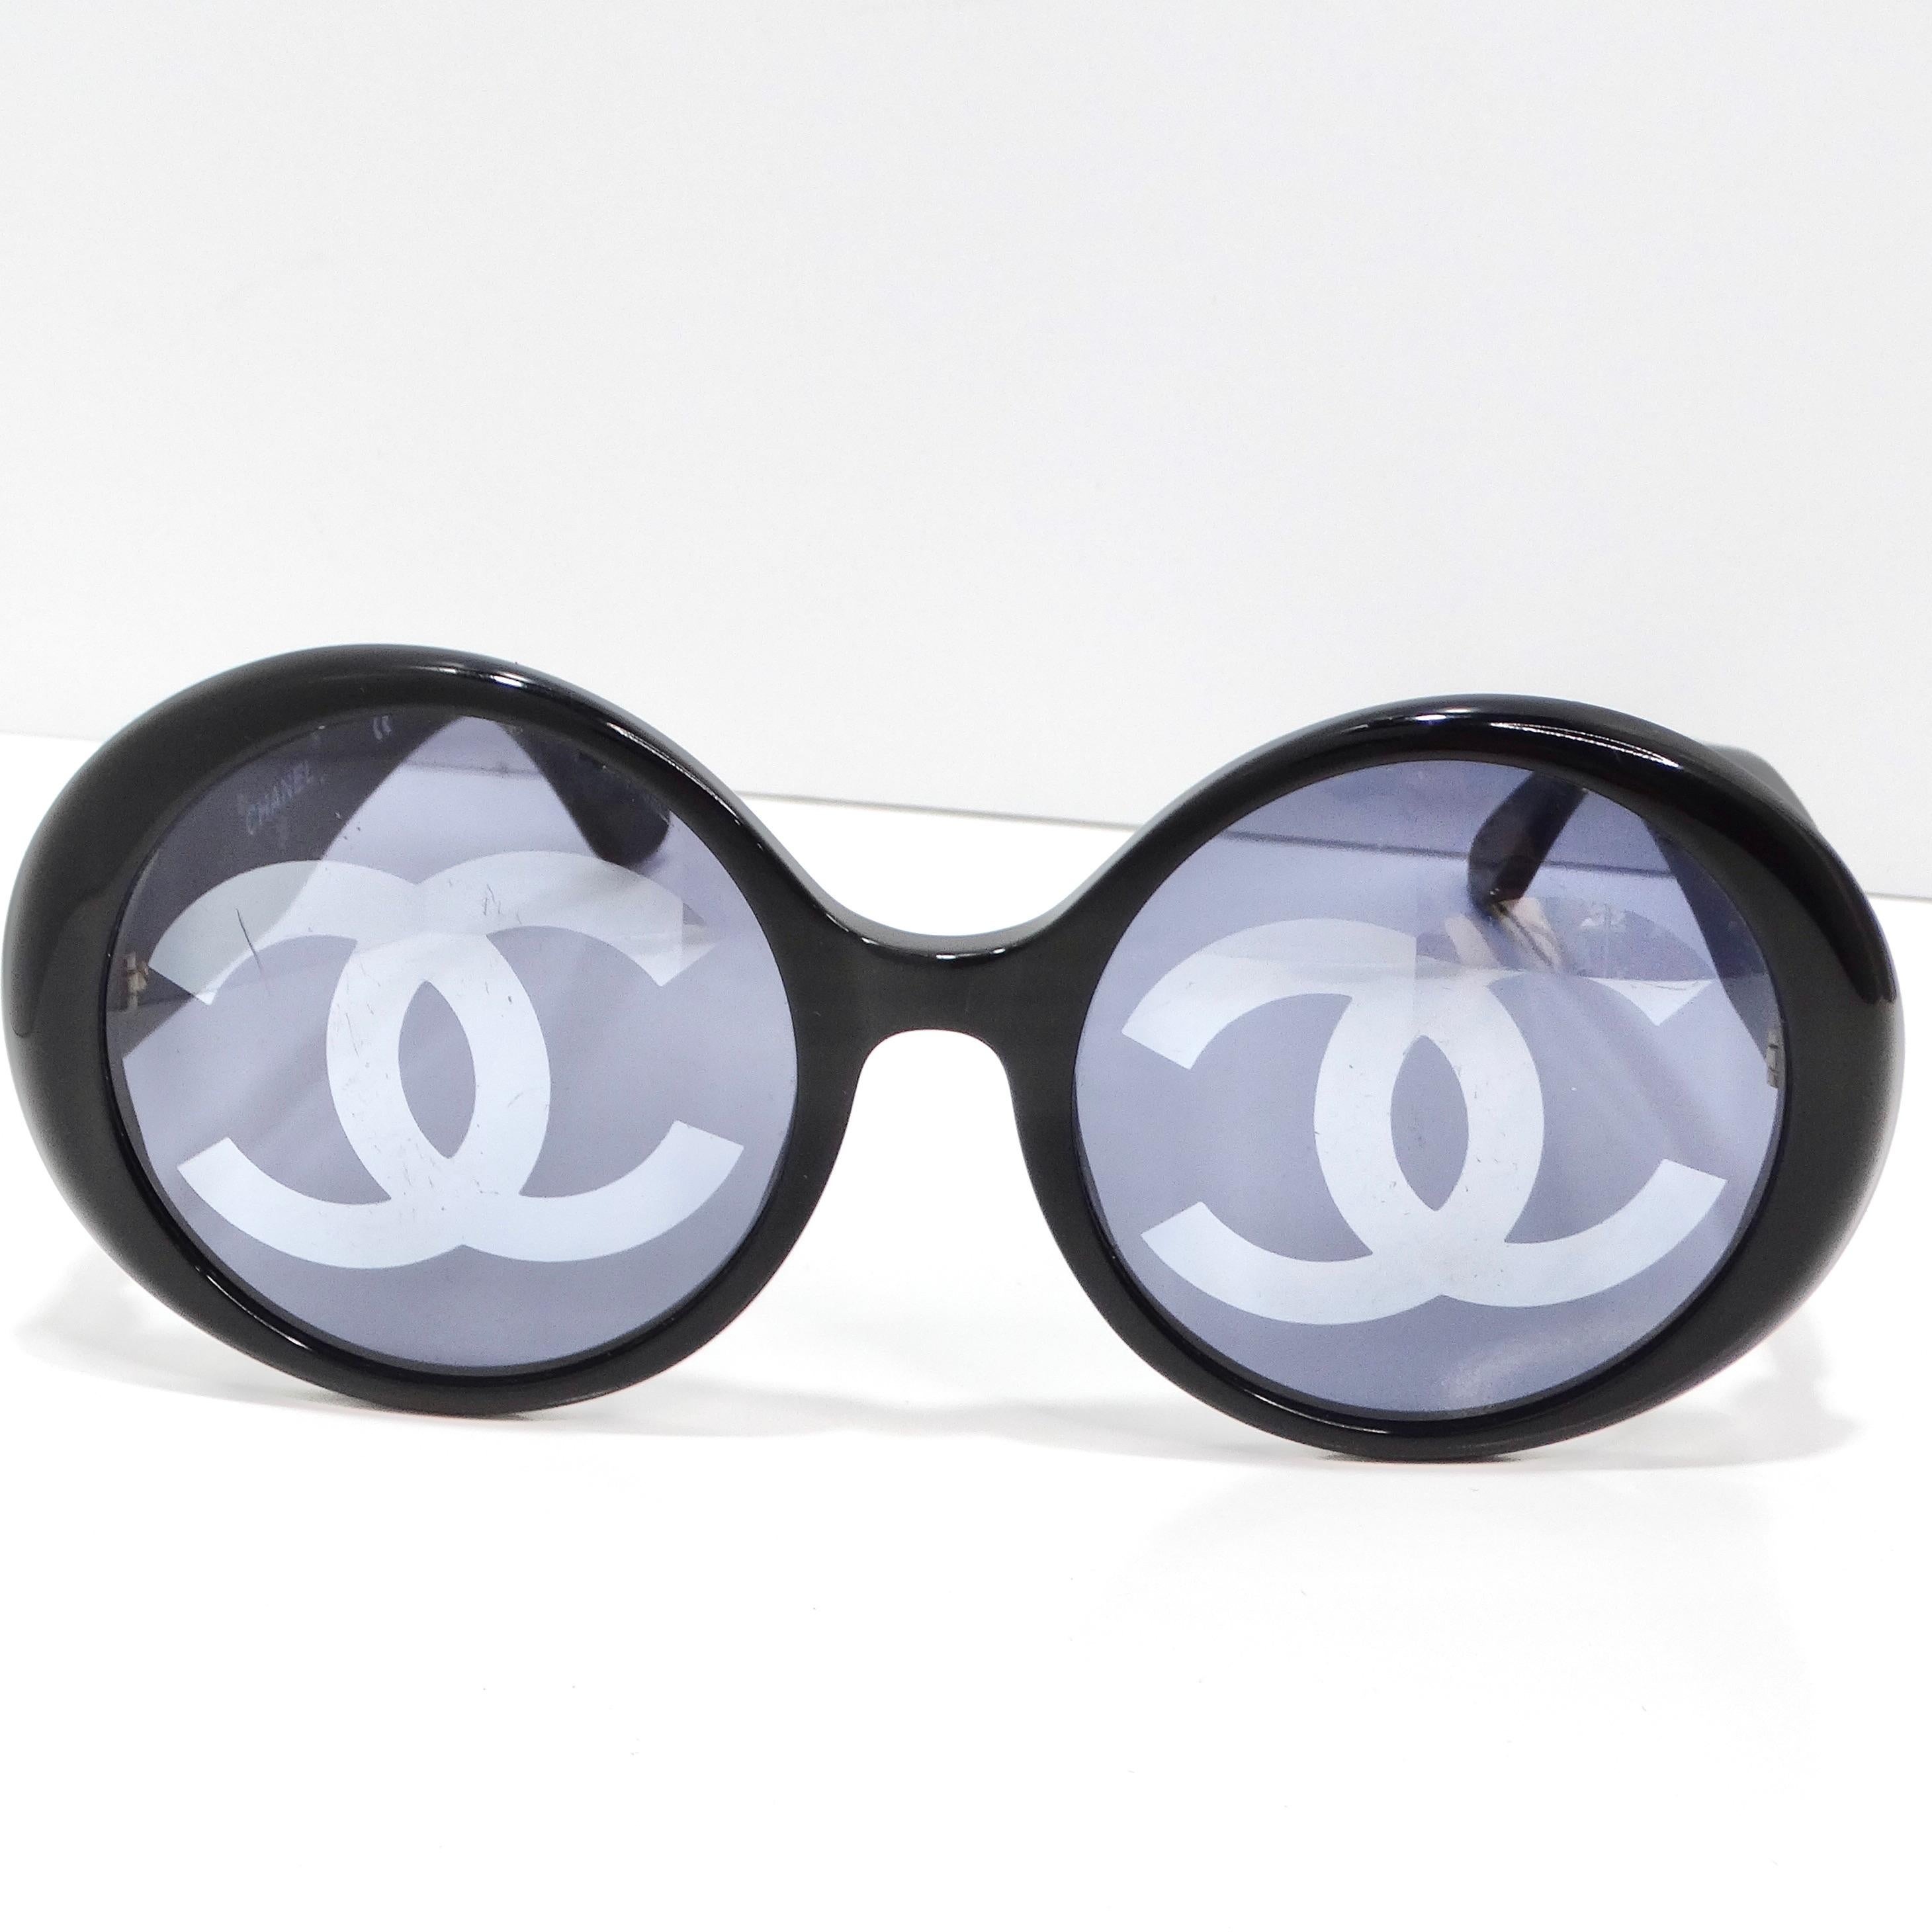 Indulge in a piece of fashion history with the Chanel 1993 Black CC Logo Round Lens Sunglasses, a rare and coveted find from Chanel's iconic 1993 runway show. These show-stopping sunglasses boast round lenses that exude timeless elegance, while the